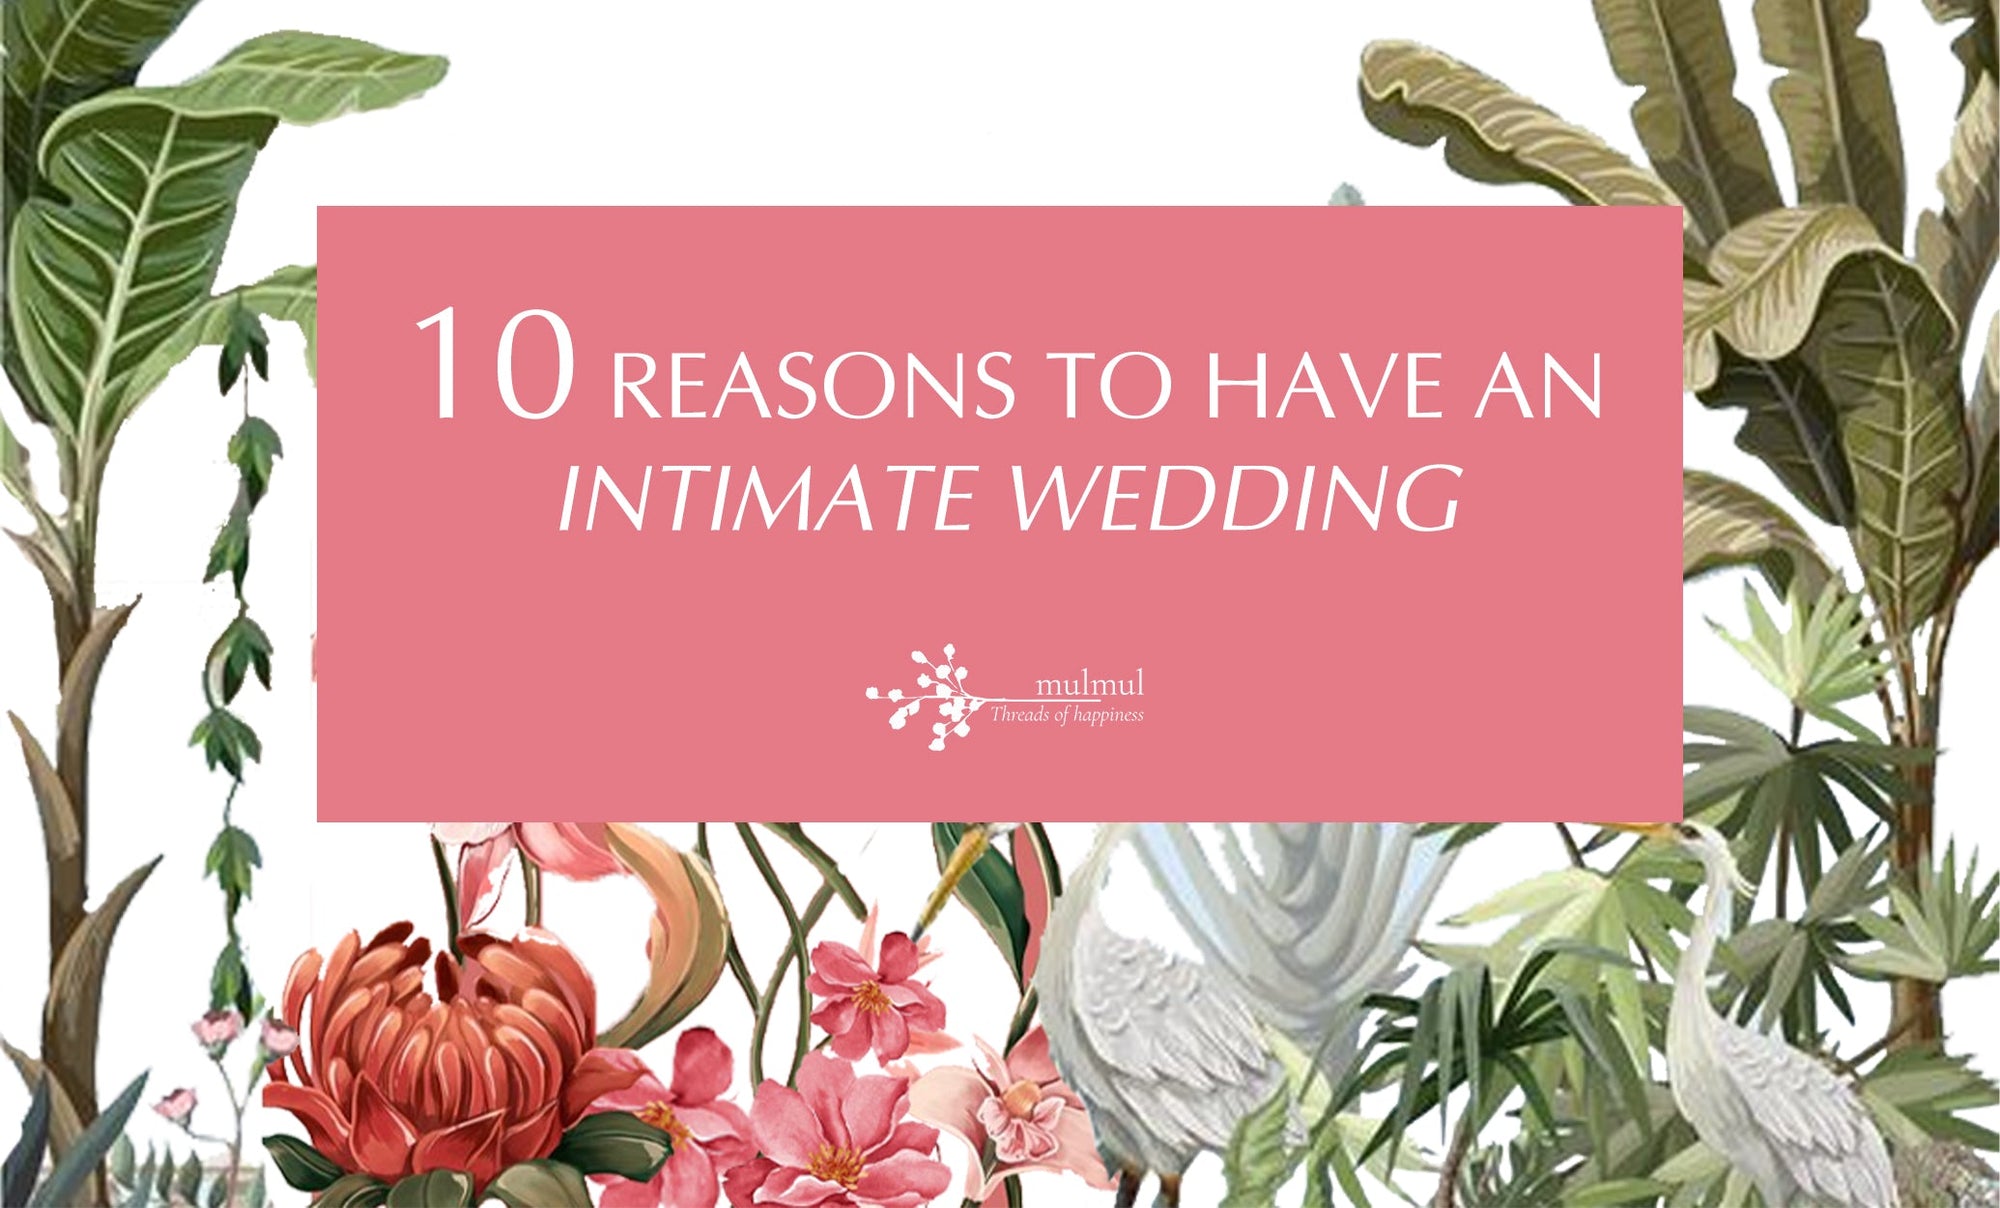 10 Reasons To Have An Intimate Wedding - Shop Mulmul